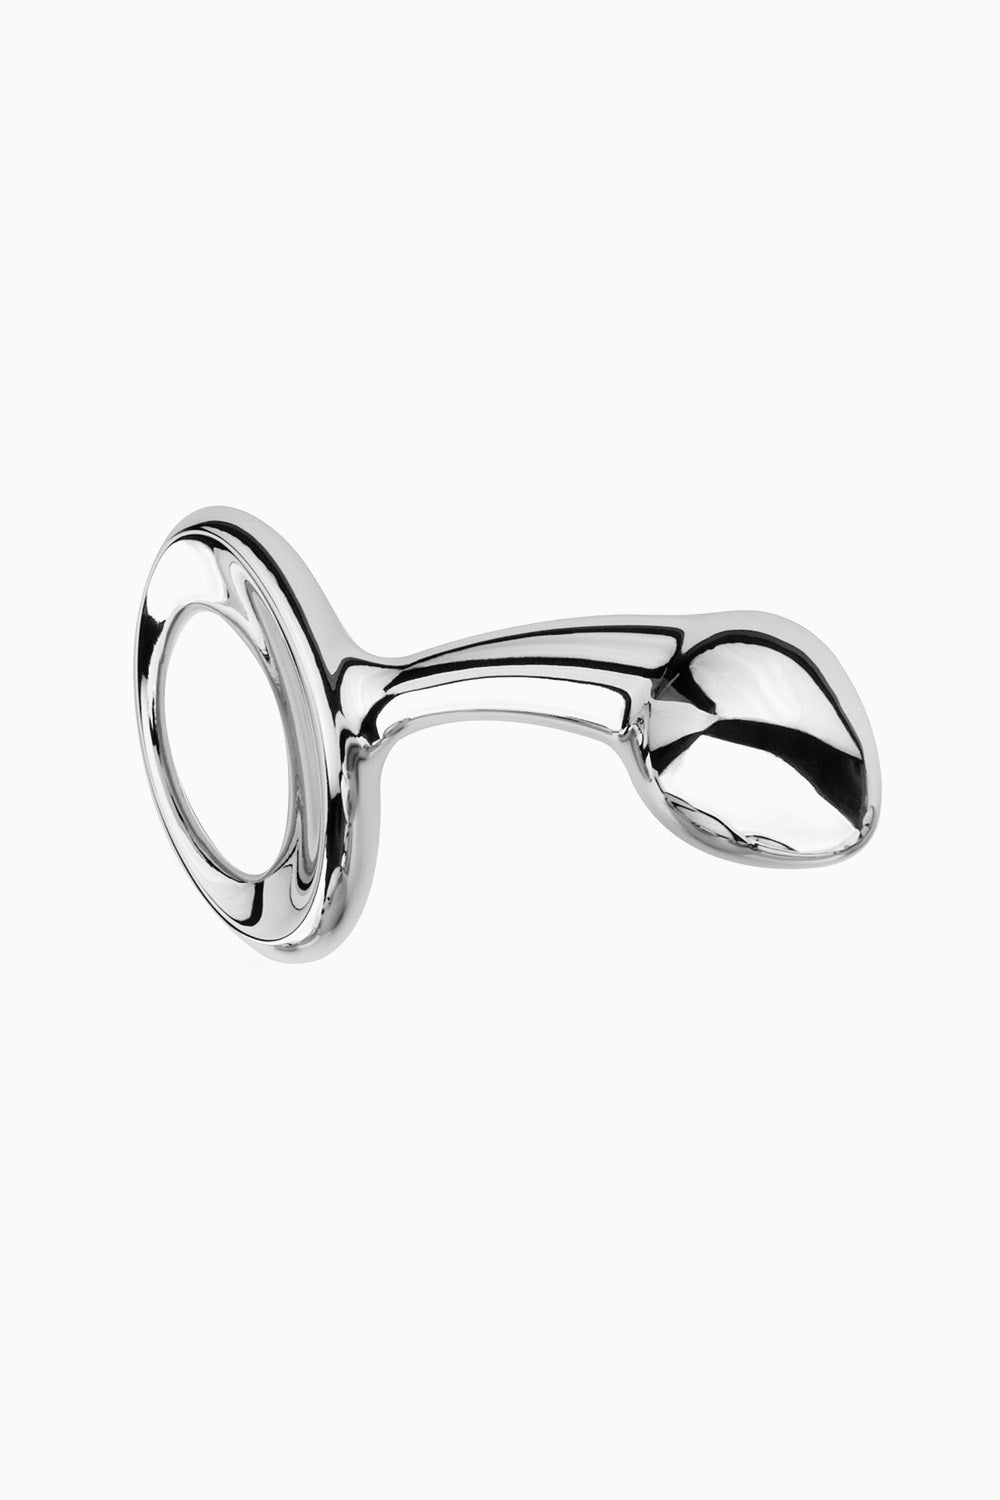 NJOY Pure Small Stainless Steel Butt Plug